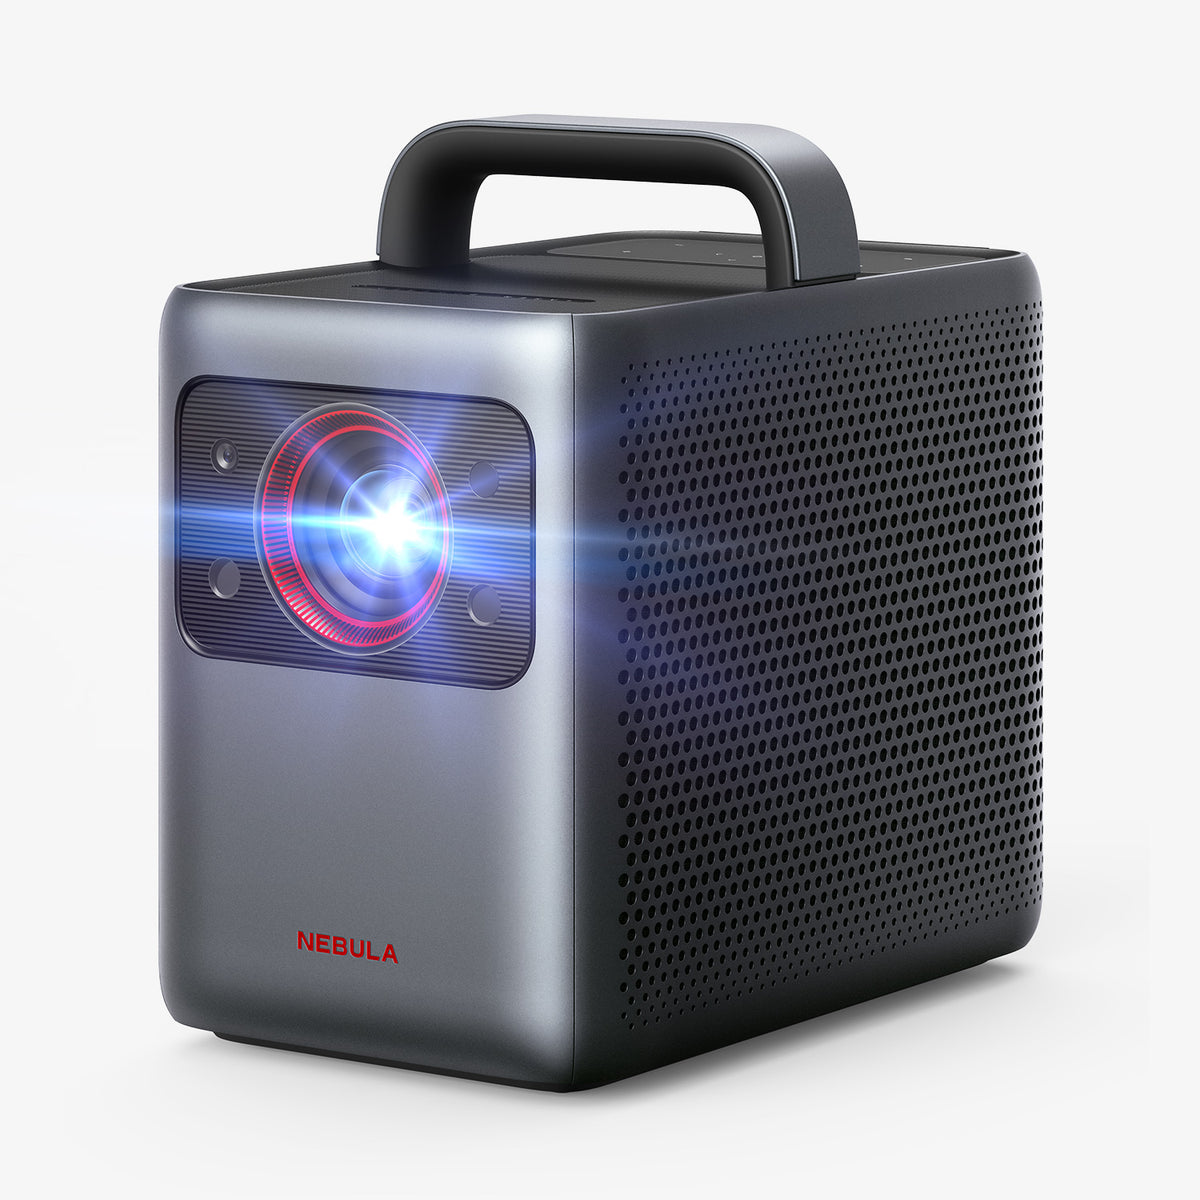 Nebula Cosmos Laser shines brightly in any space.